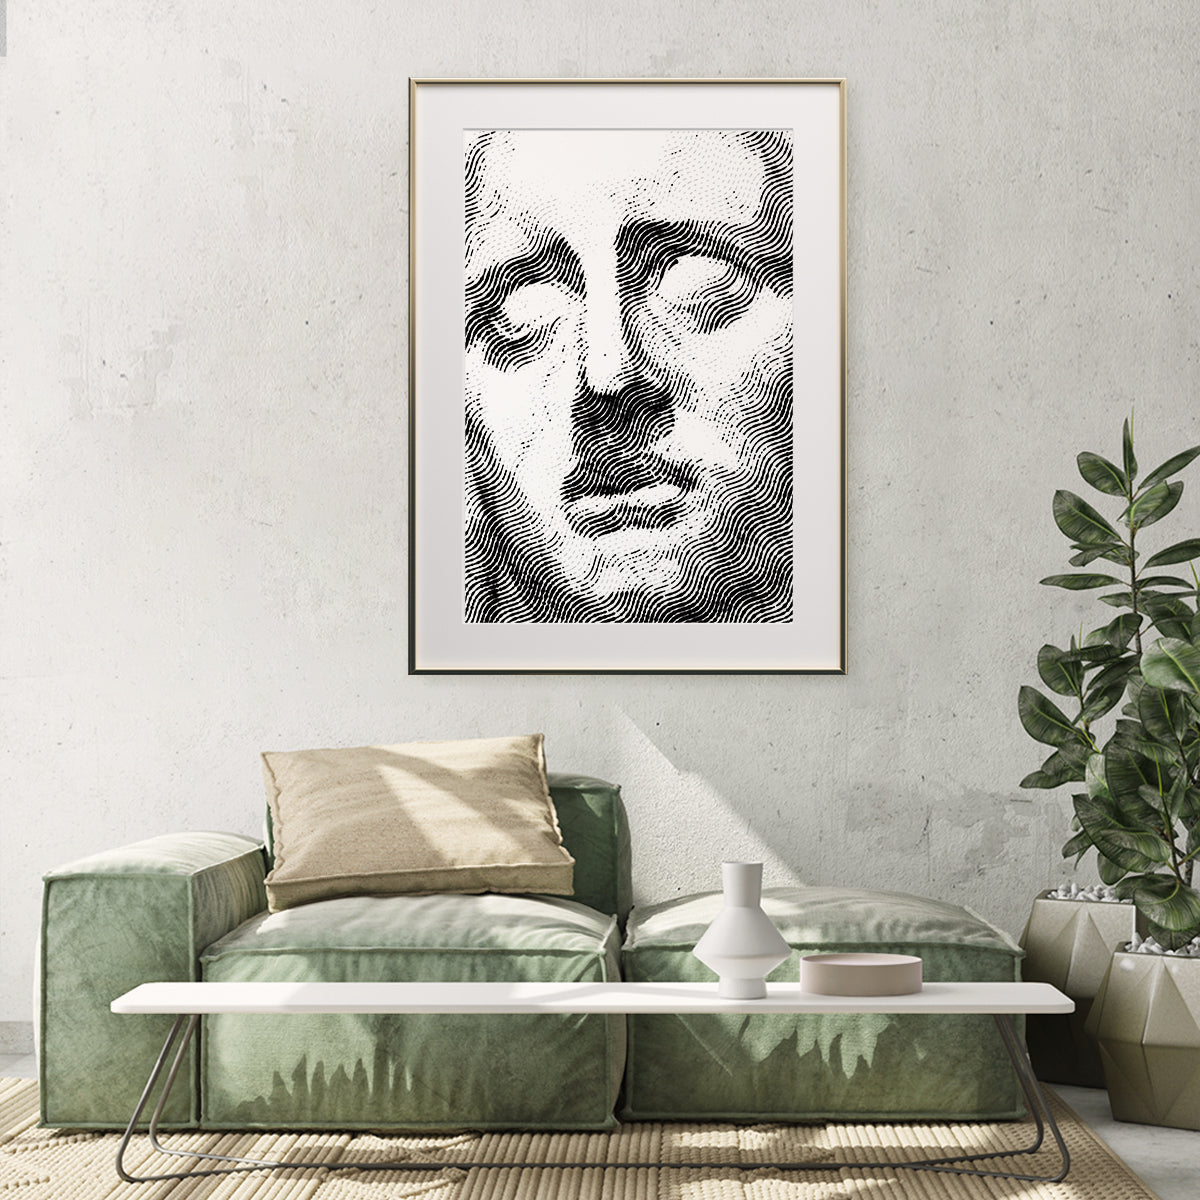 Ancient Greek Minimalist Portrait Black And White Cool Art Posters-Vertical Posters NOT FRAMED-CetArt-8″x10″ inches-CetArt